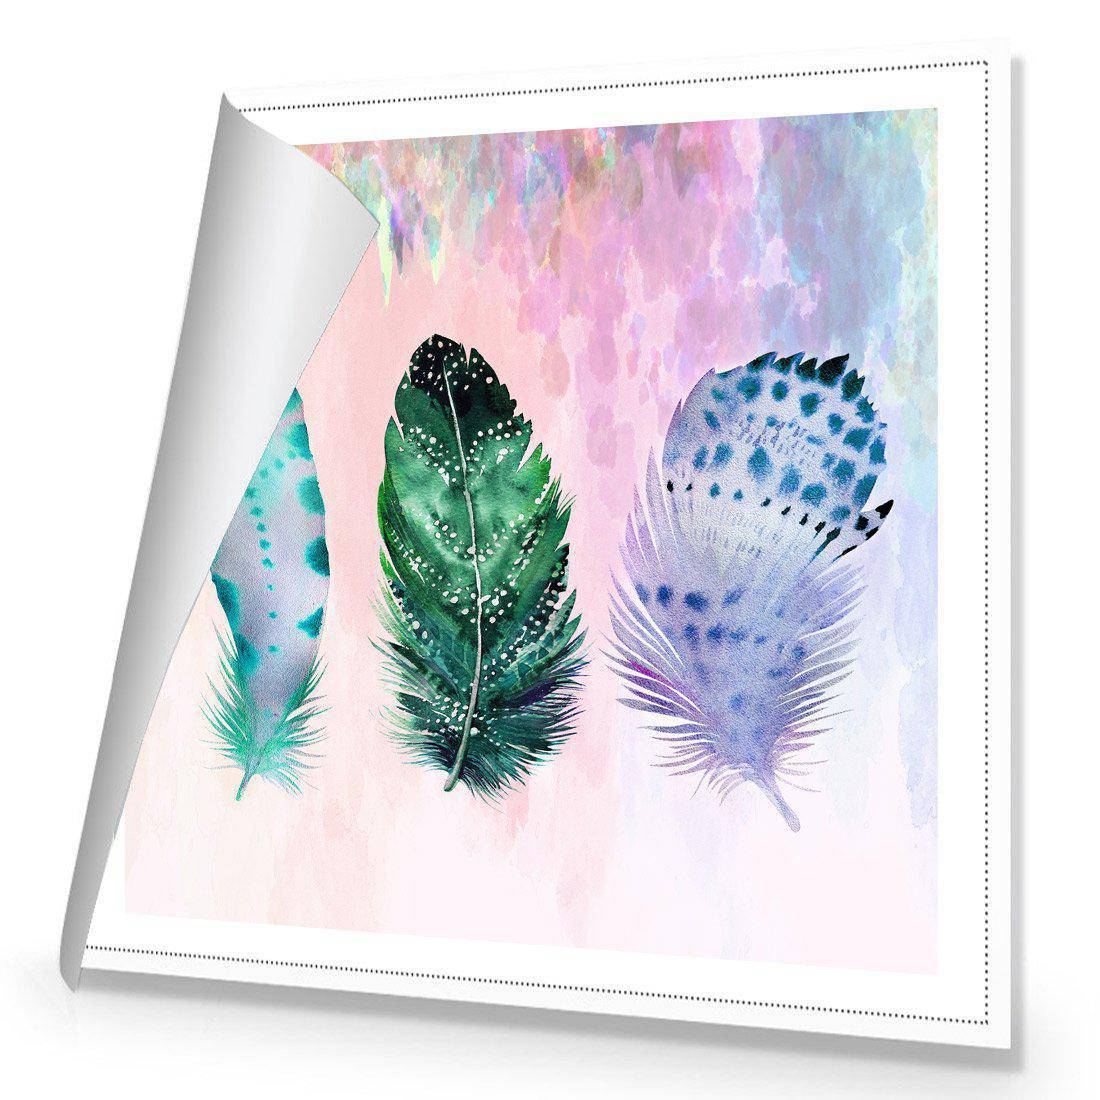 Boho Feathers, Teal, Square Canvas Art-Canvas-Wall Art Designs-37x37cm-Rolled Canvas-Wall Art Designs